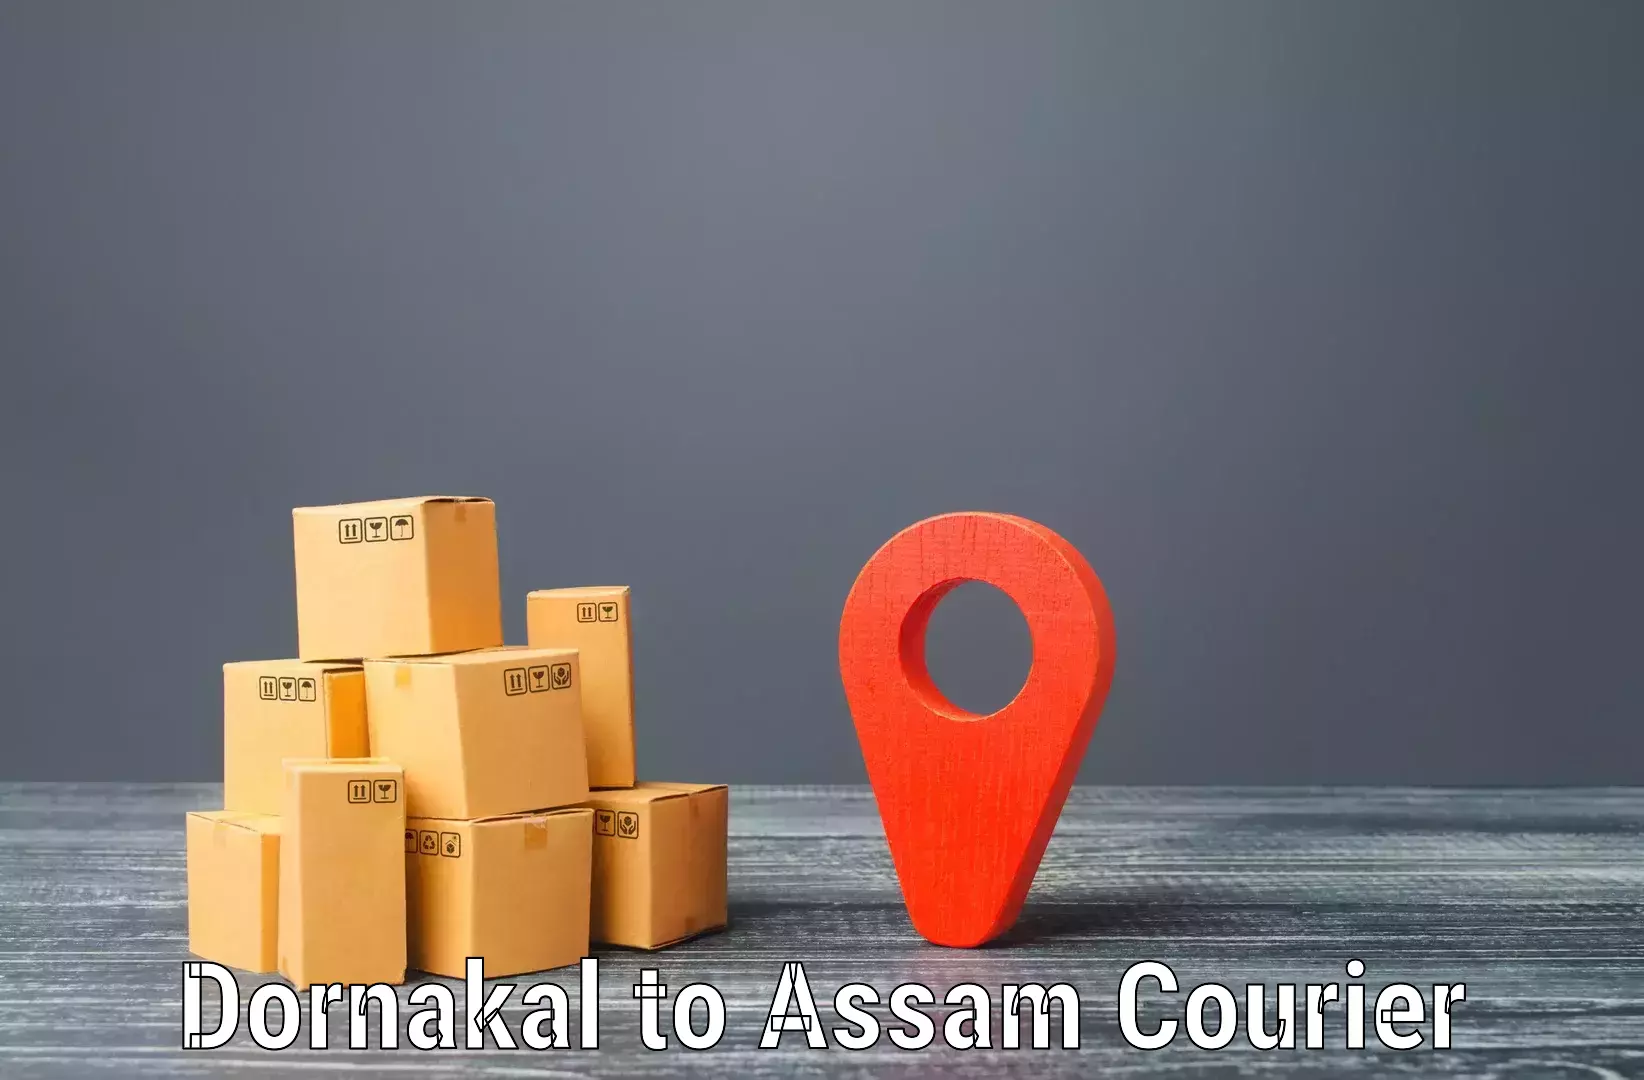 Reliable courier service Dornakal to Guwahati University